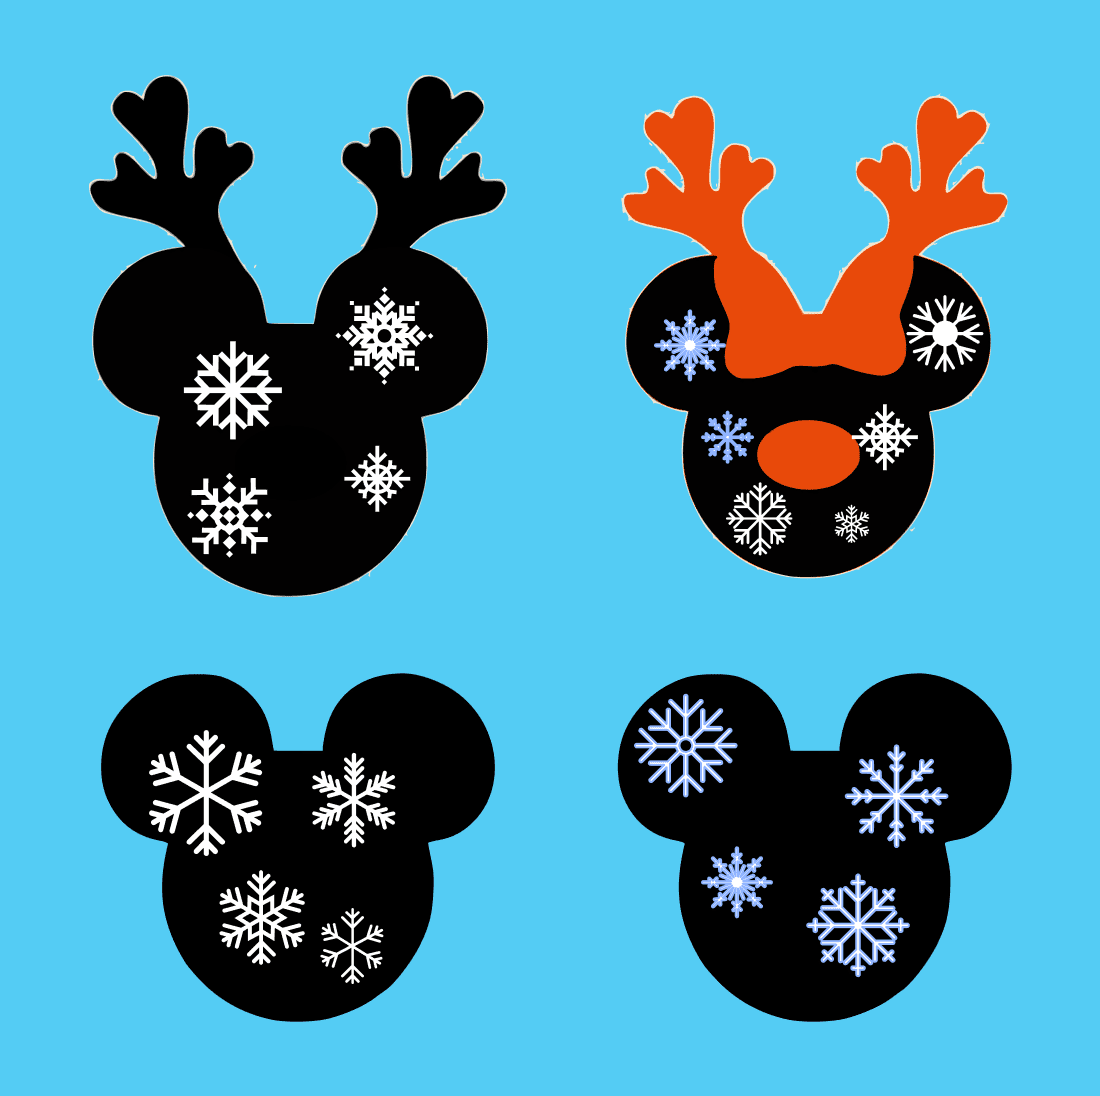 Cute disney snowflake images on the blue background.